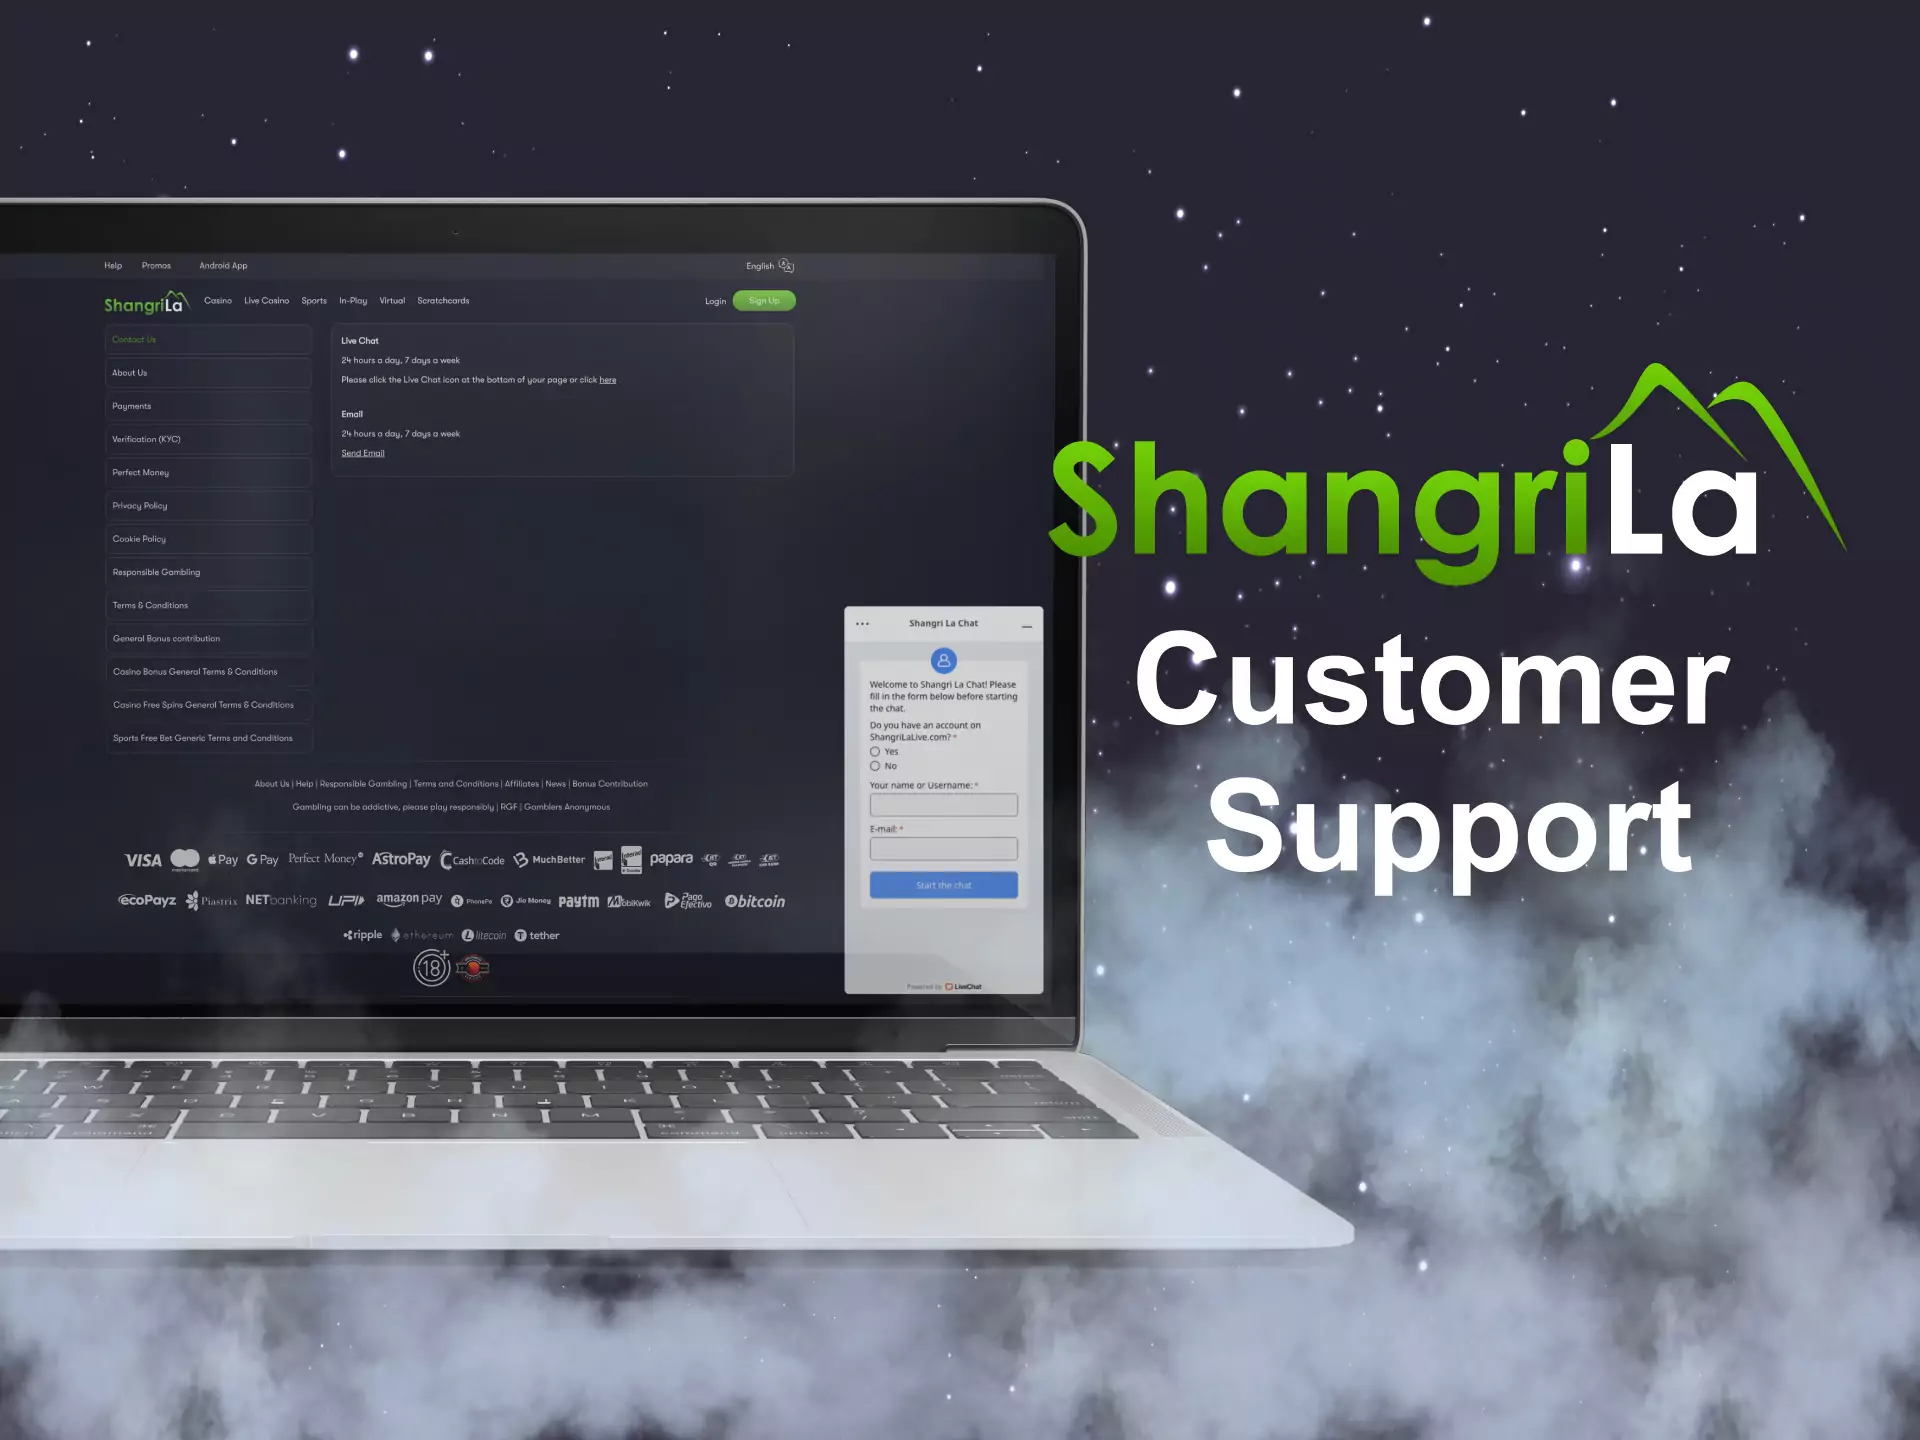 Ask the customer support if you have questions about betting on Shangri La.